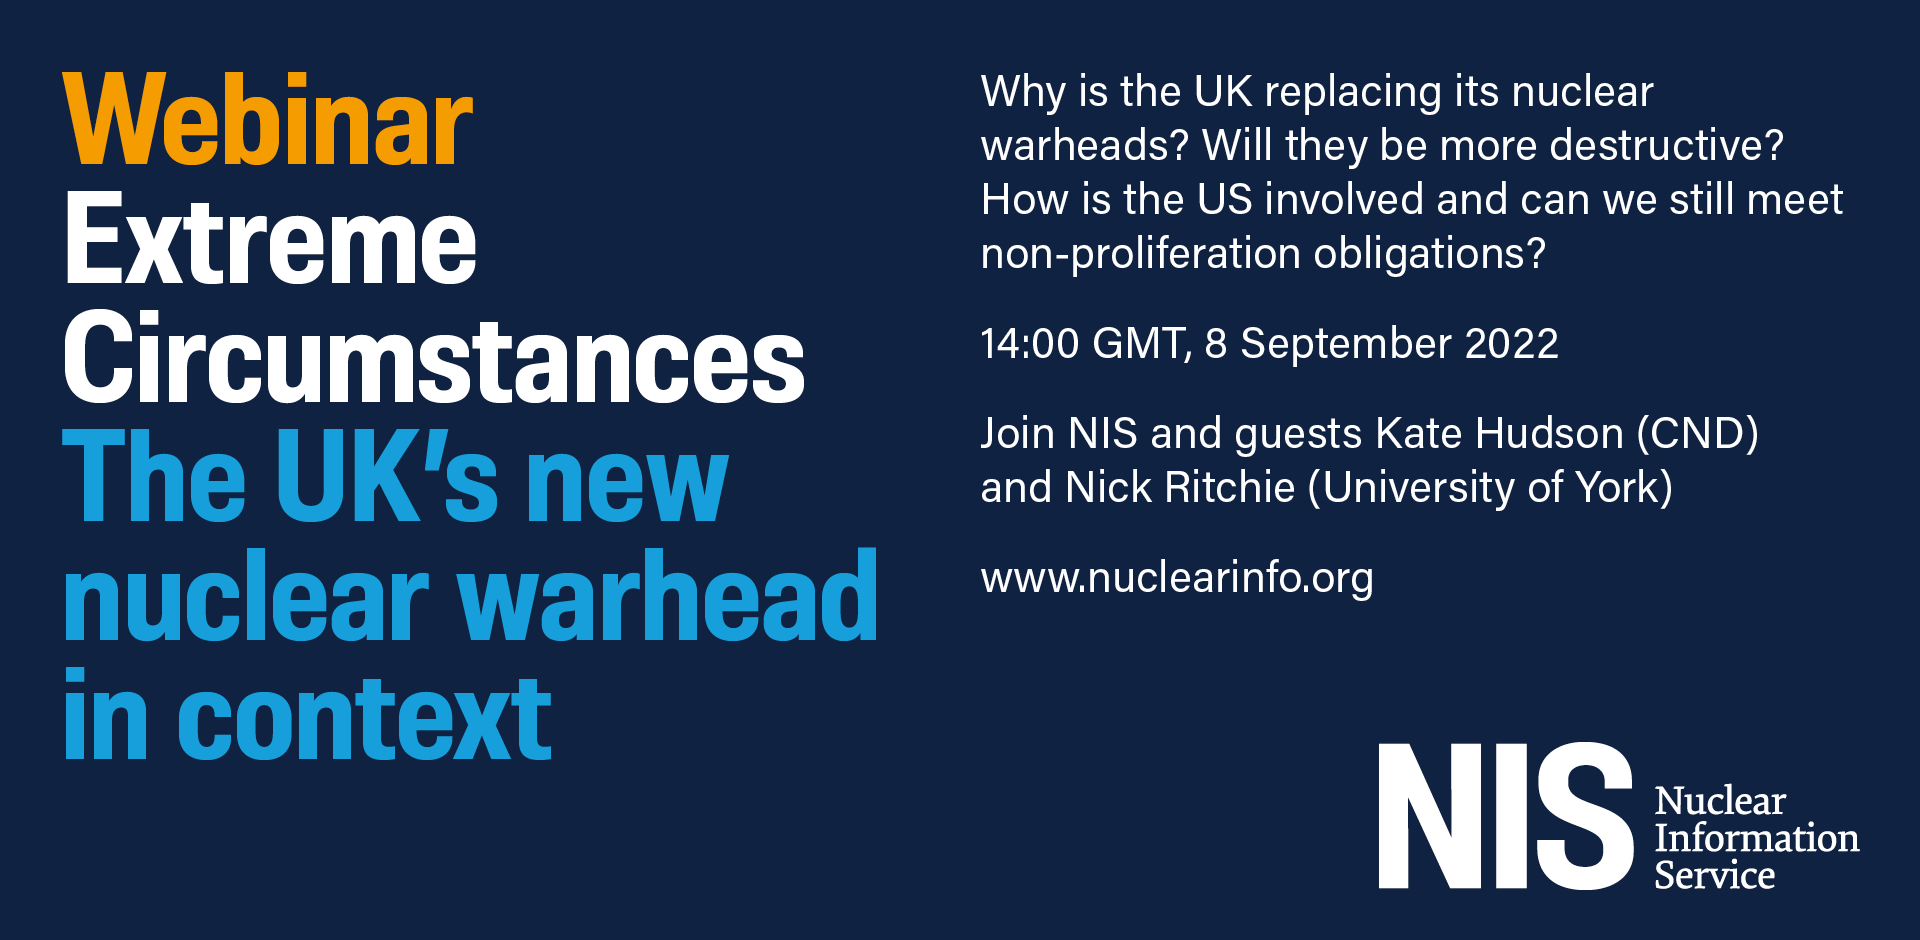 advert for webinar 8 september 2022 14:00 with NIS, Kate Hudson and Nick Ritchie